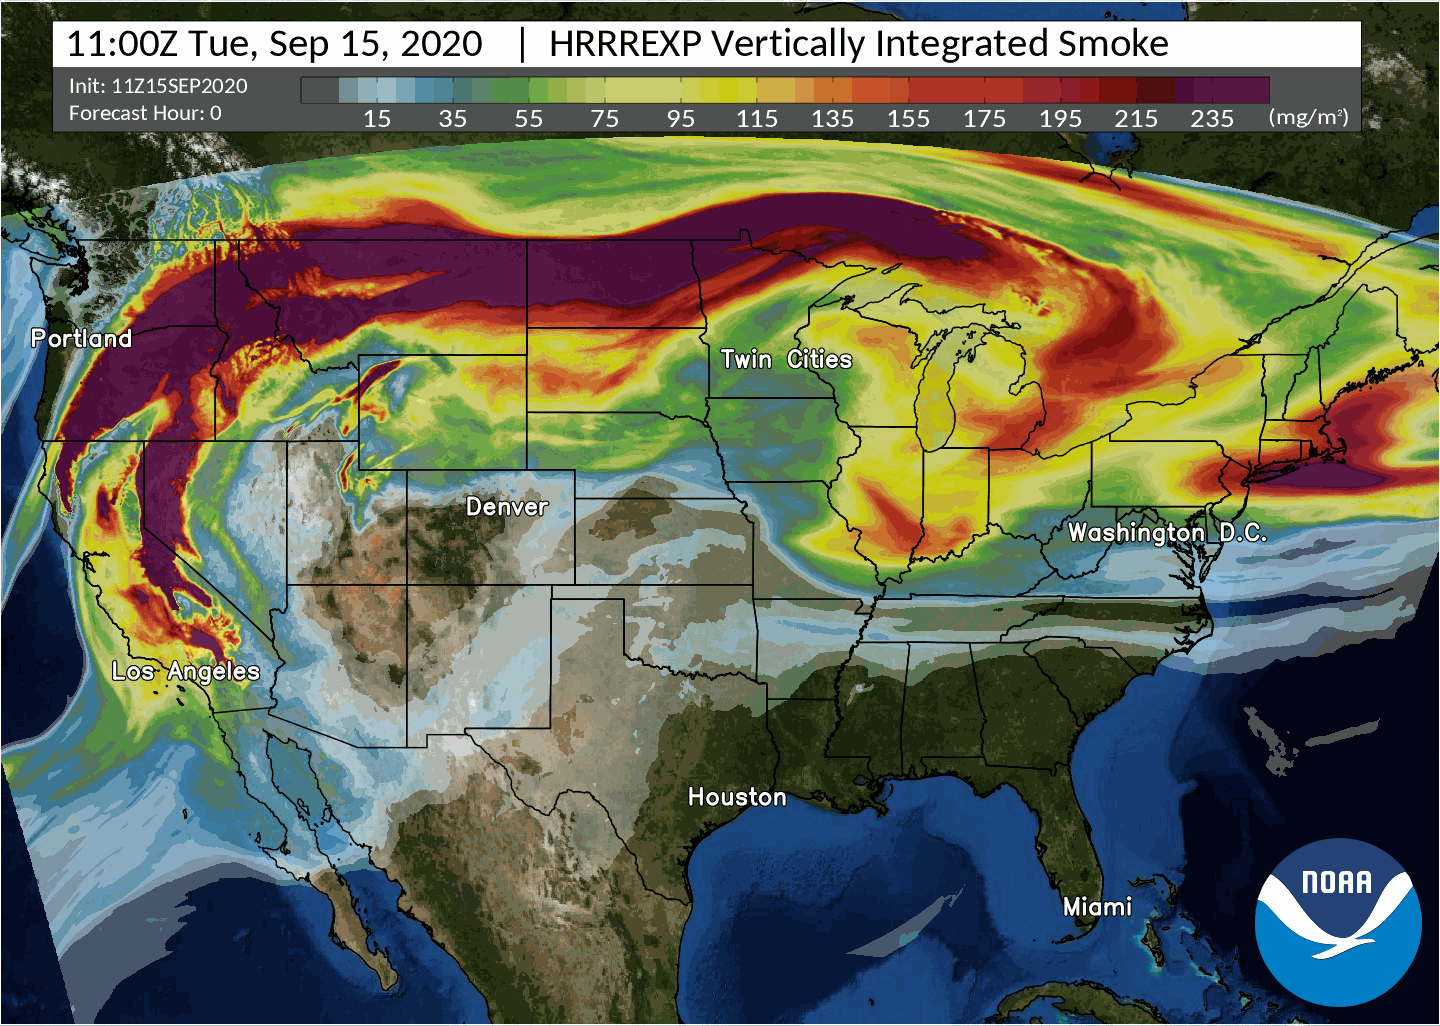 A HRRR-Smoke model forecast of vertically integrated smoke showing where wildfire smoke will travel across the U.S. This product displays the effect of fire smoke load that includes smoke in the boundary layer as well as aloft, illustrating the integral effect of fire smoke throughout the atmosphere.